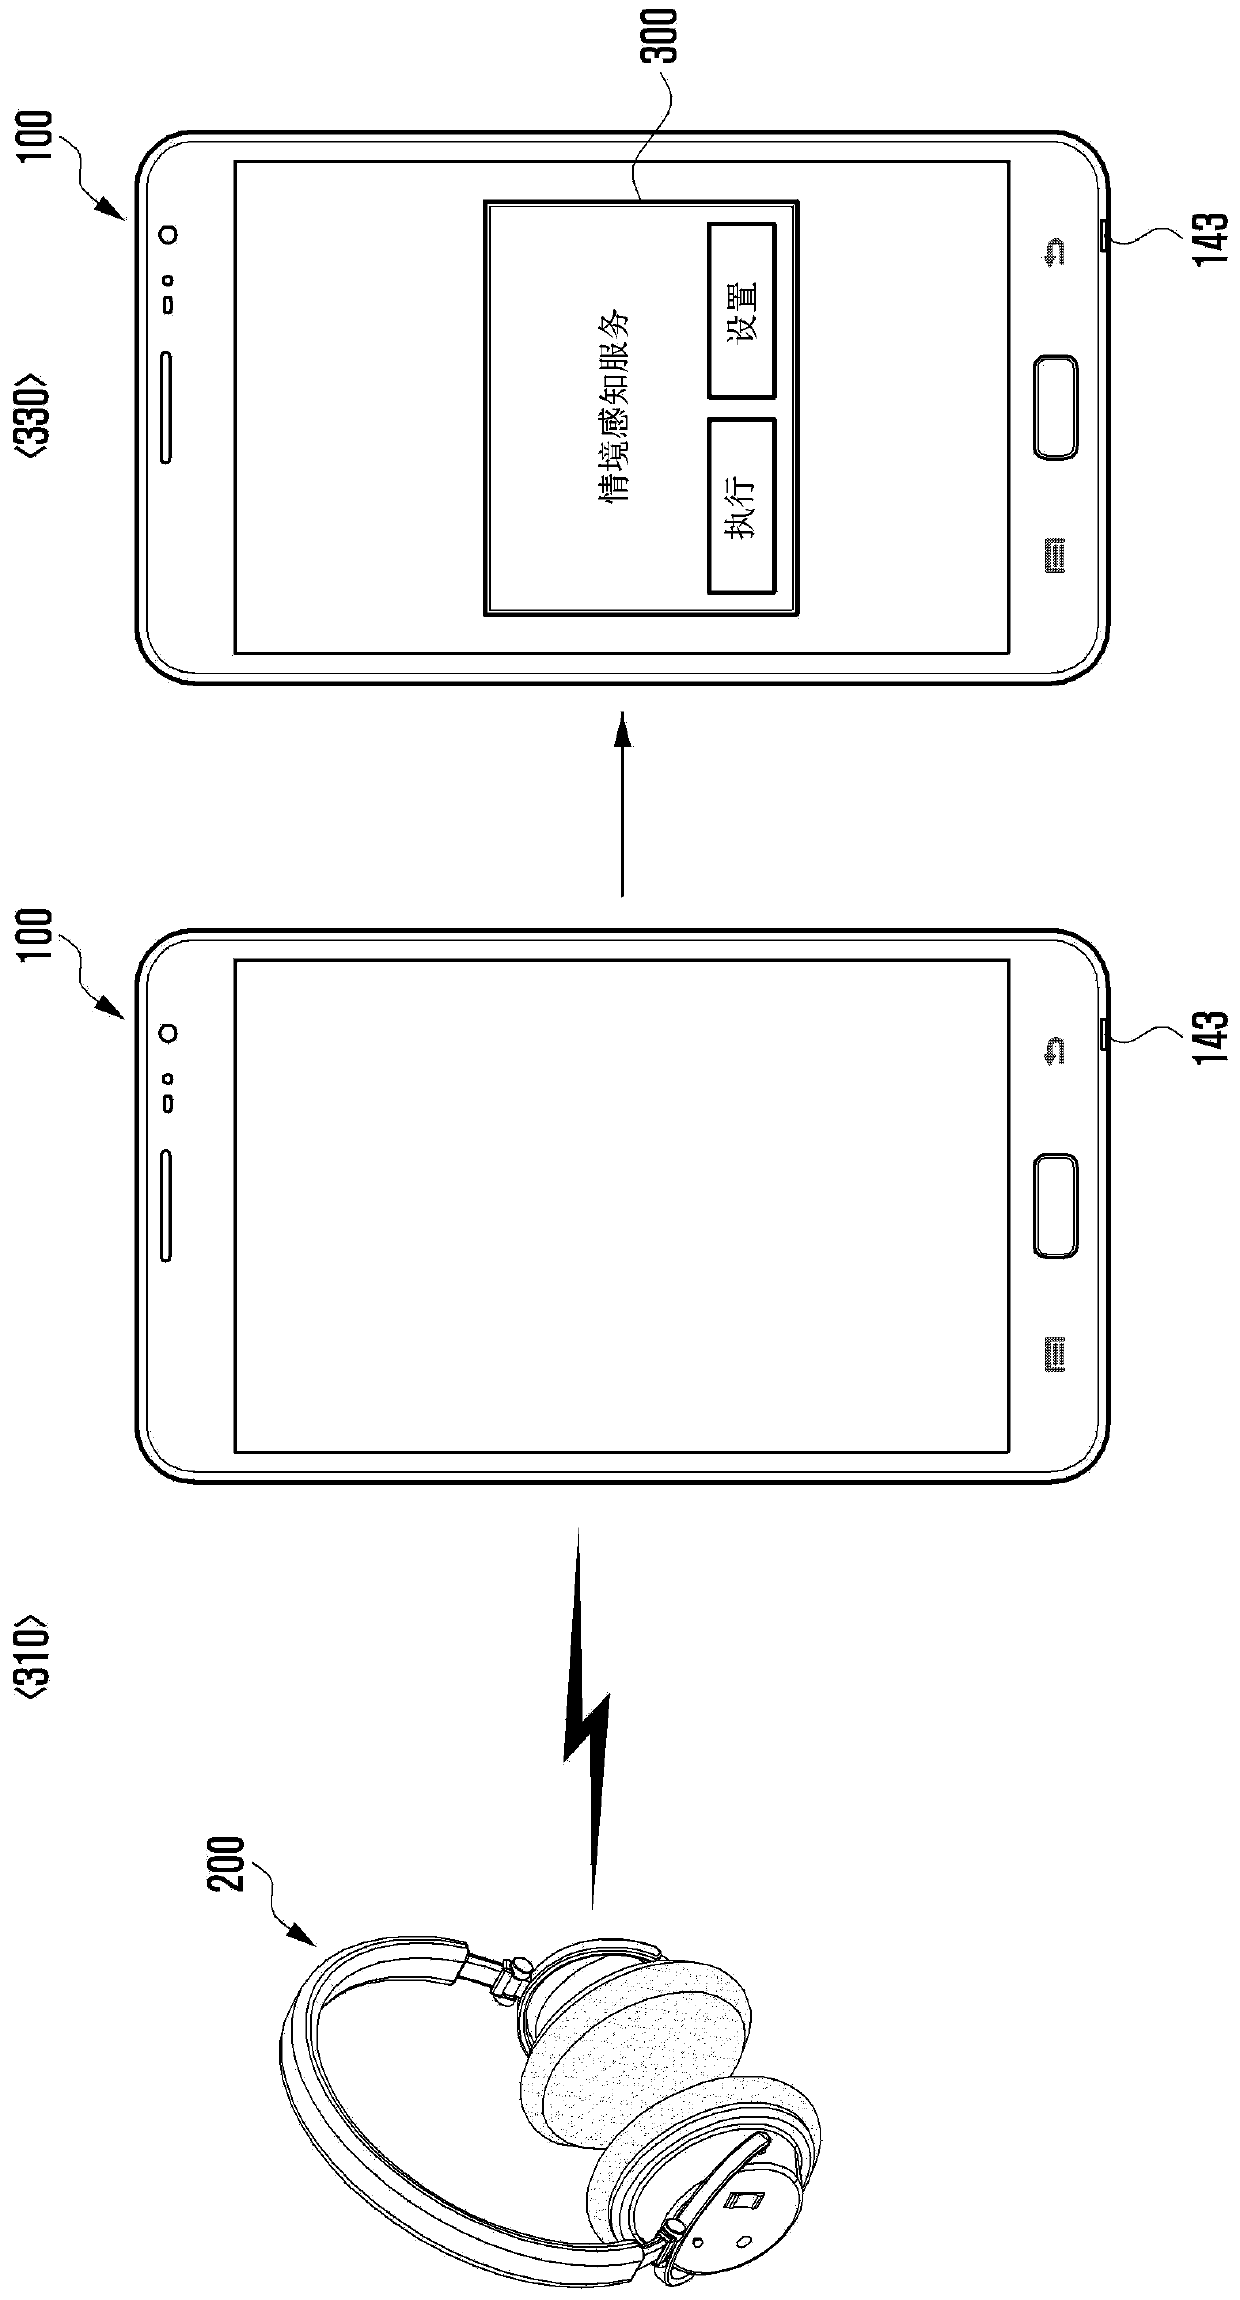 Method and user device for providing context-aware services using speech recognition